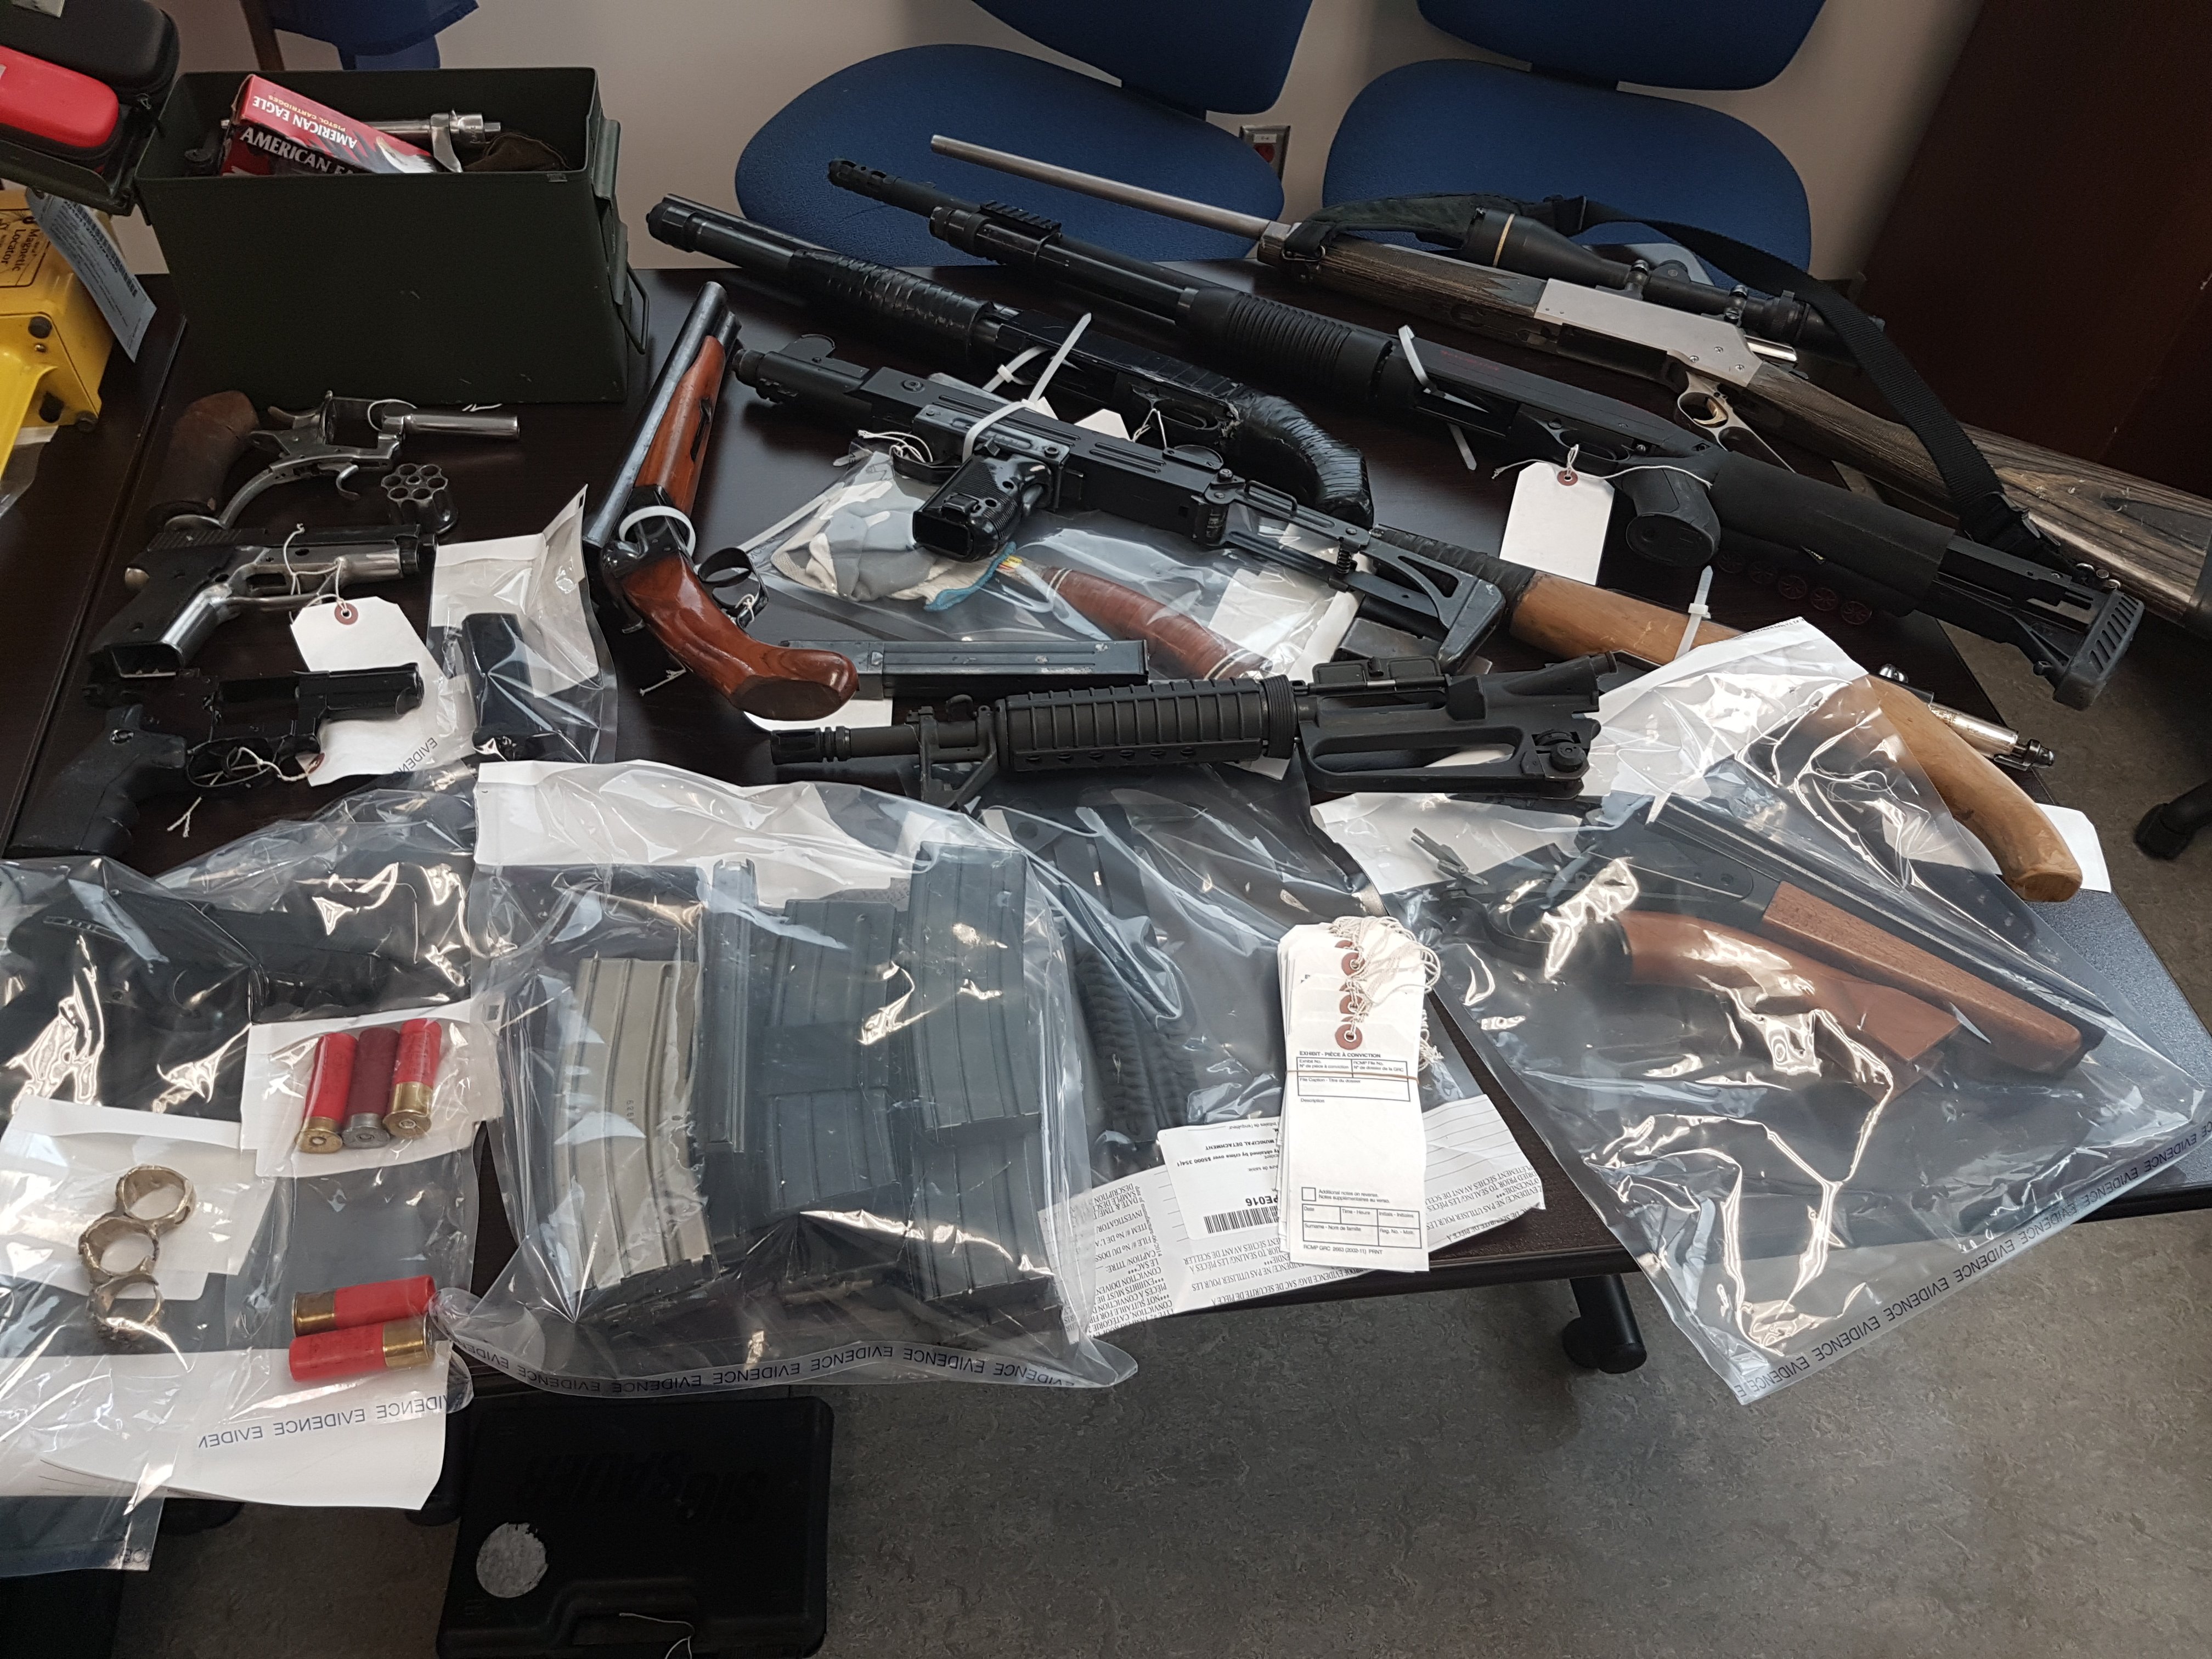 BUST - Pictured here are guns that were seized from a home in Sylvan Lake after a major bust by police.